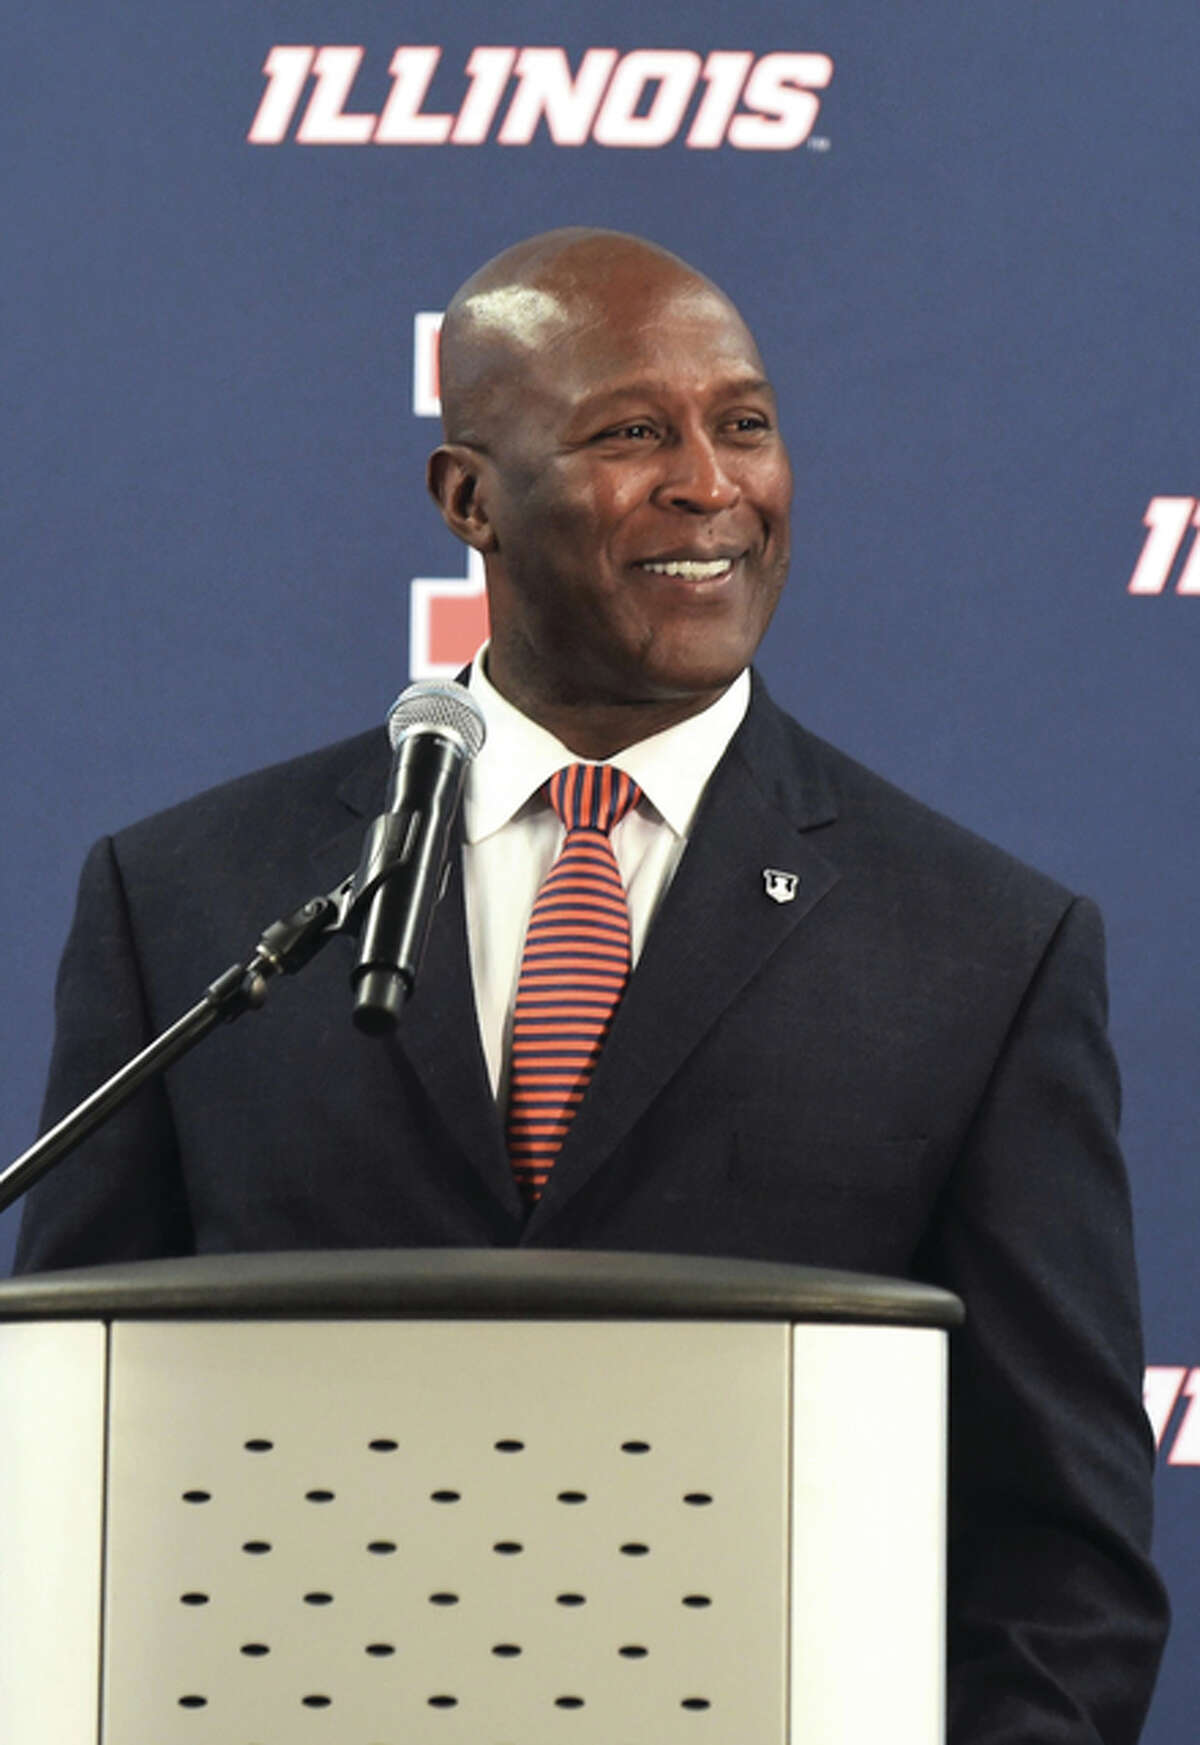 Lovie Smith addresses the mediia at the news conference introducing Smith as Illinois’ new football coach Monday in Champaign.